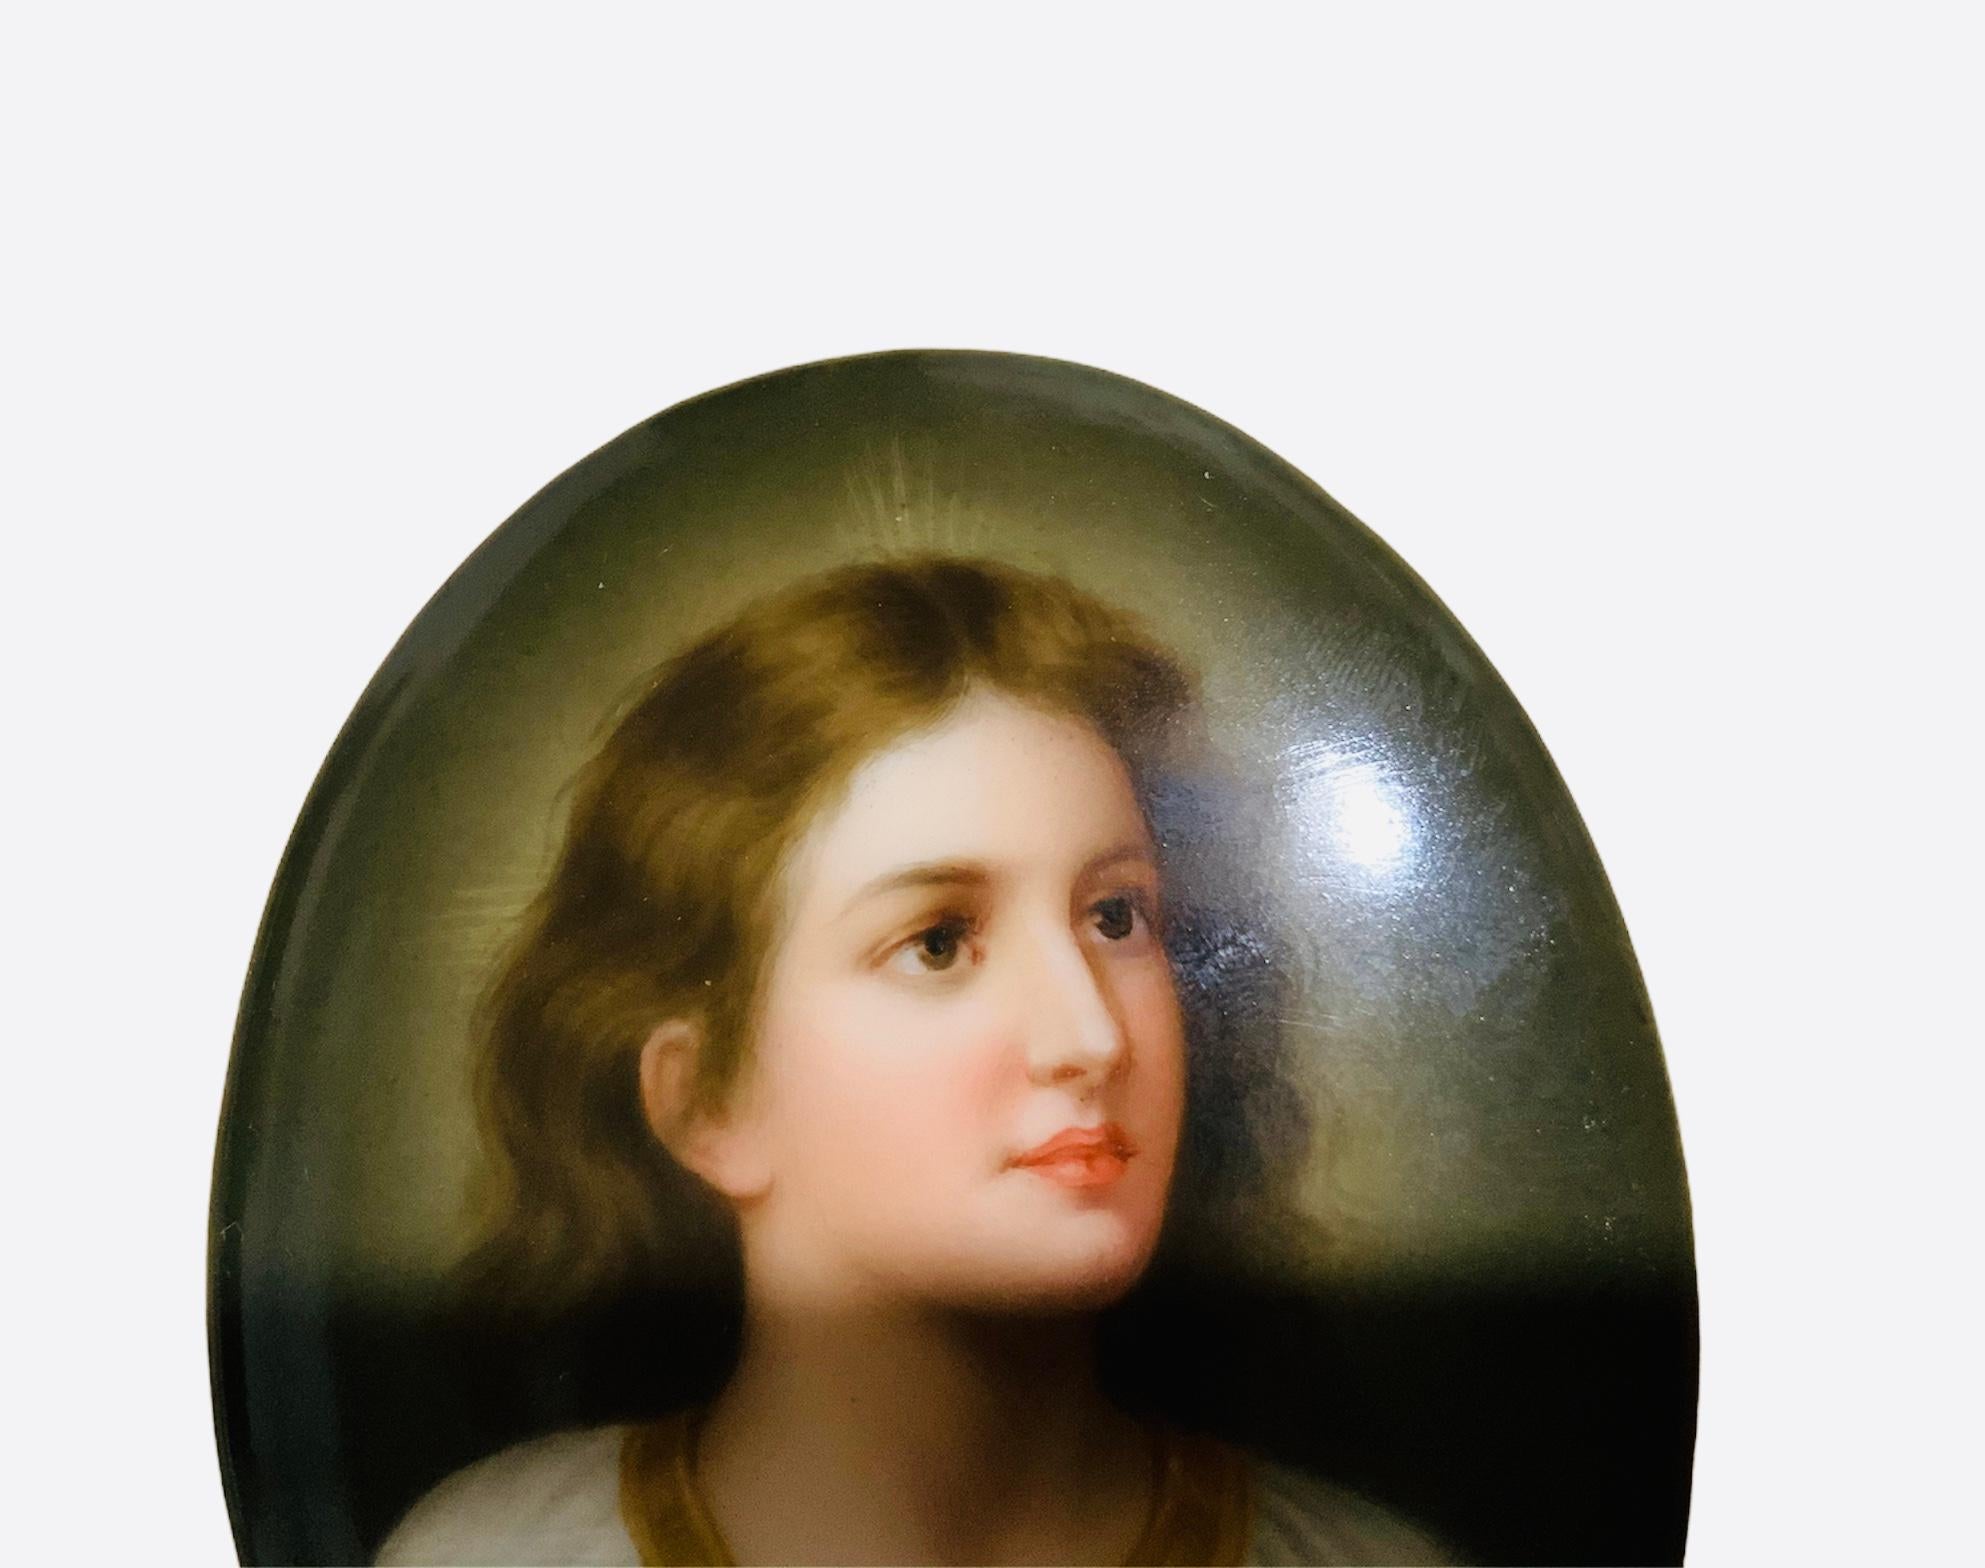 This is a C.M.Hutschenreuther hand painted porcelain small oval plaque. It depicts a portrait of a child Jesus after Heinrich Hoffman’s painting. His eyes depict a piercing and innocent gaze. It is signed Wagner in the left side. The